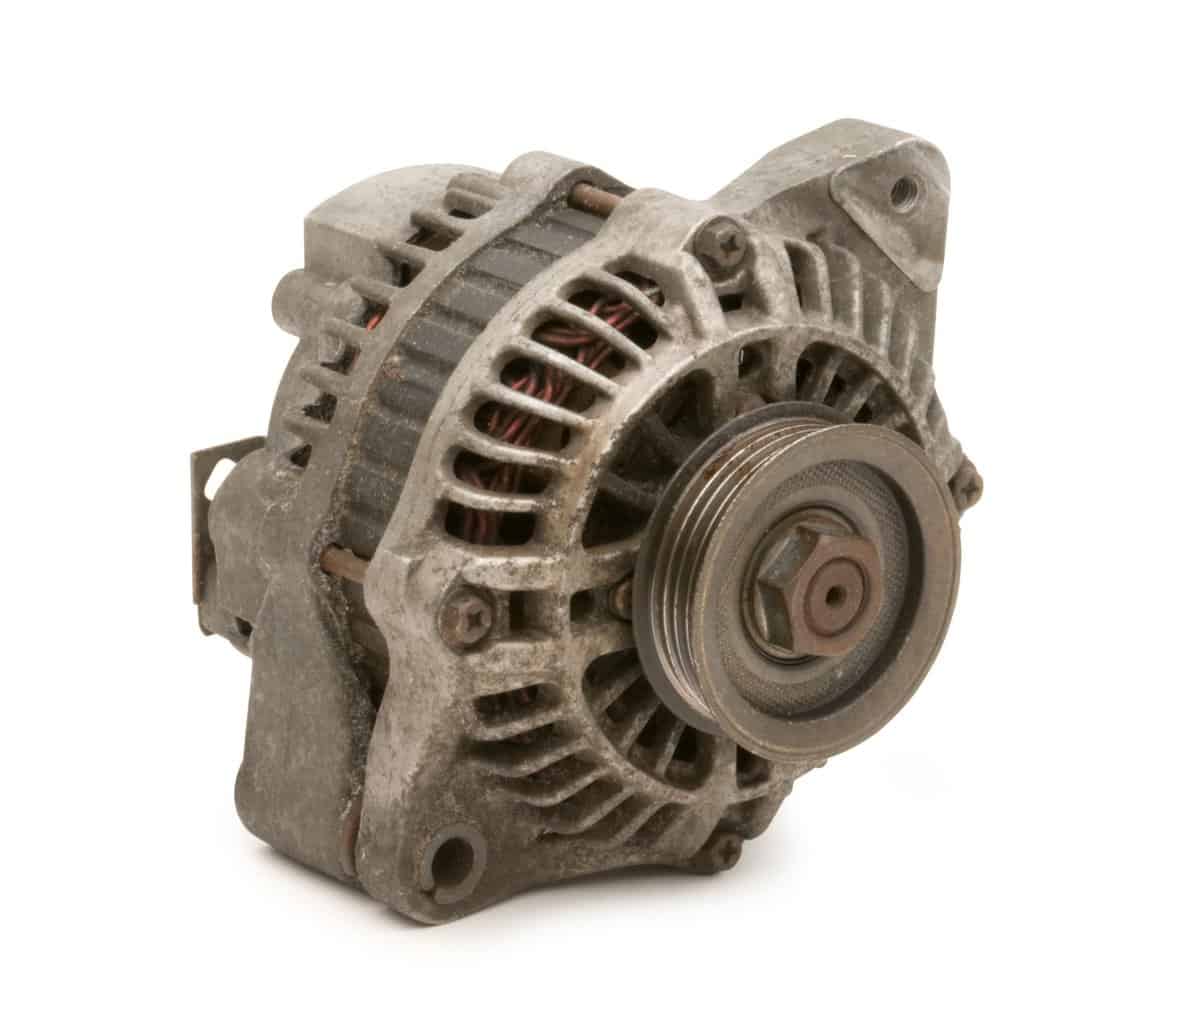 A used automotive alternator isolated on white. Clipping Path on object.